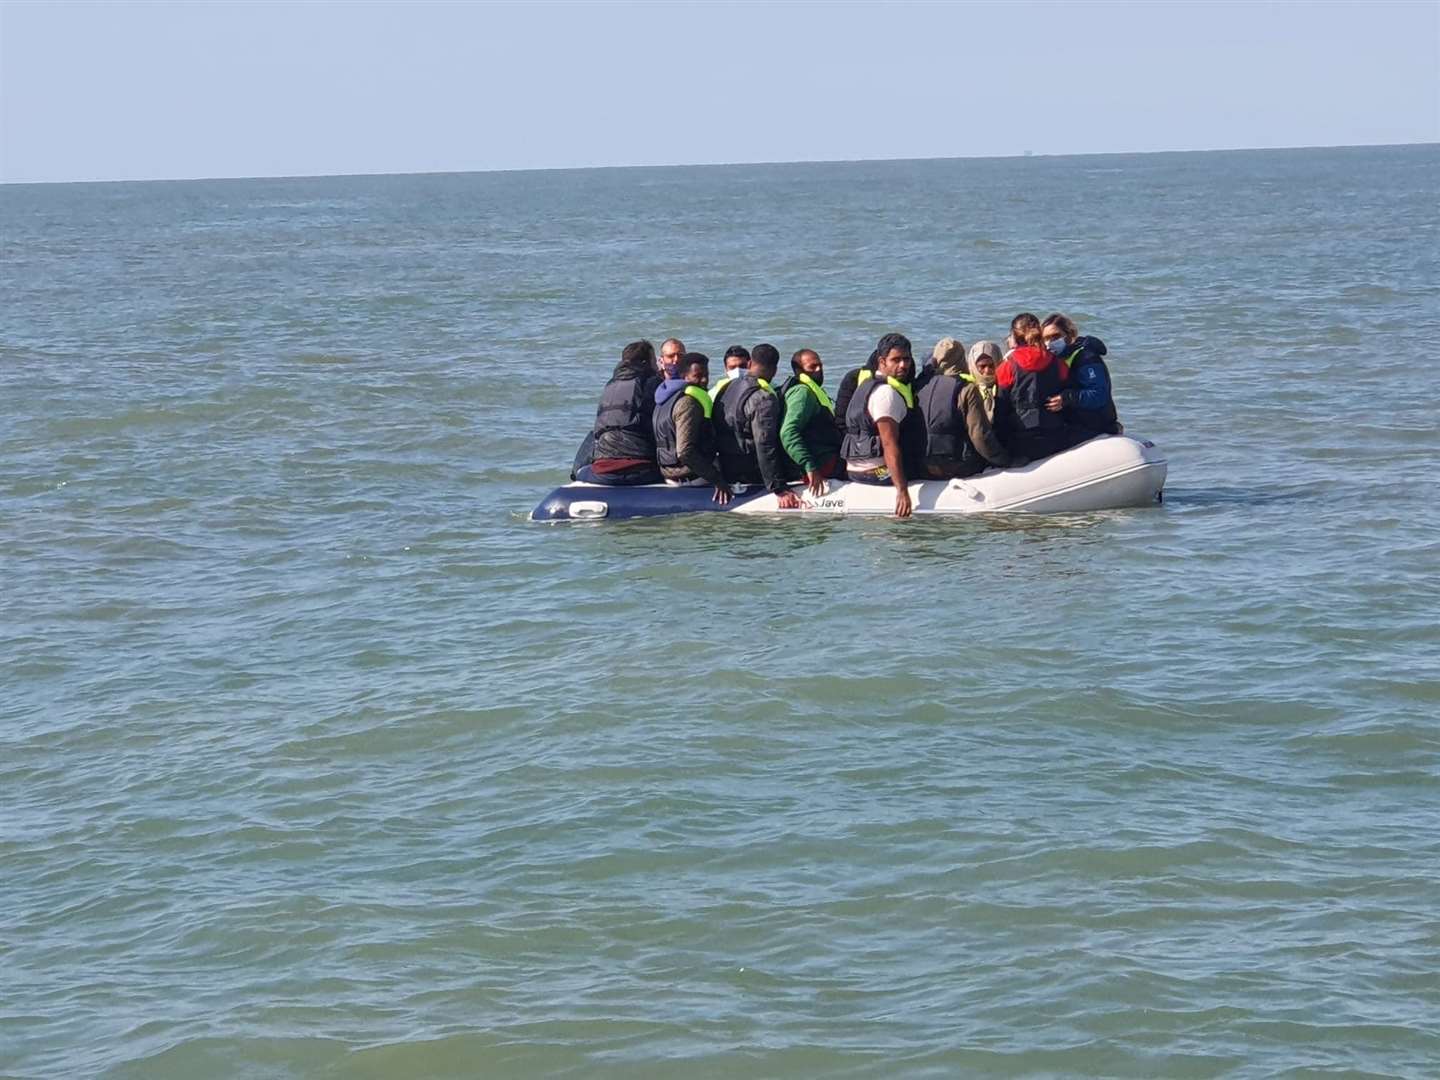 One over loaded vessel at sea carrying in excess of 13 people